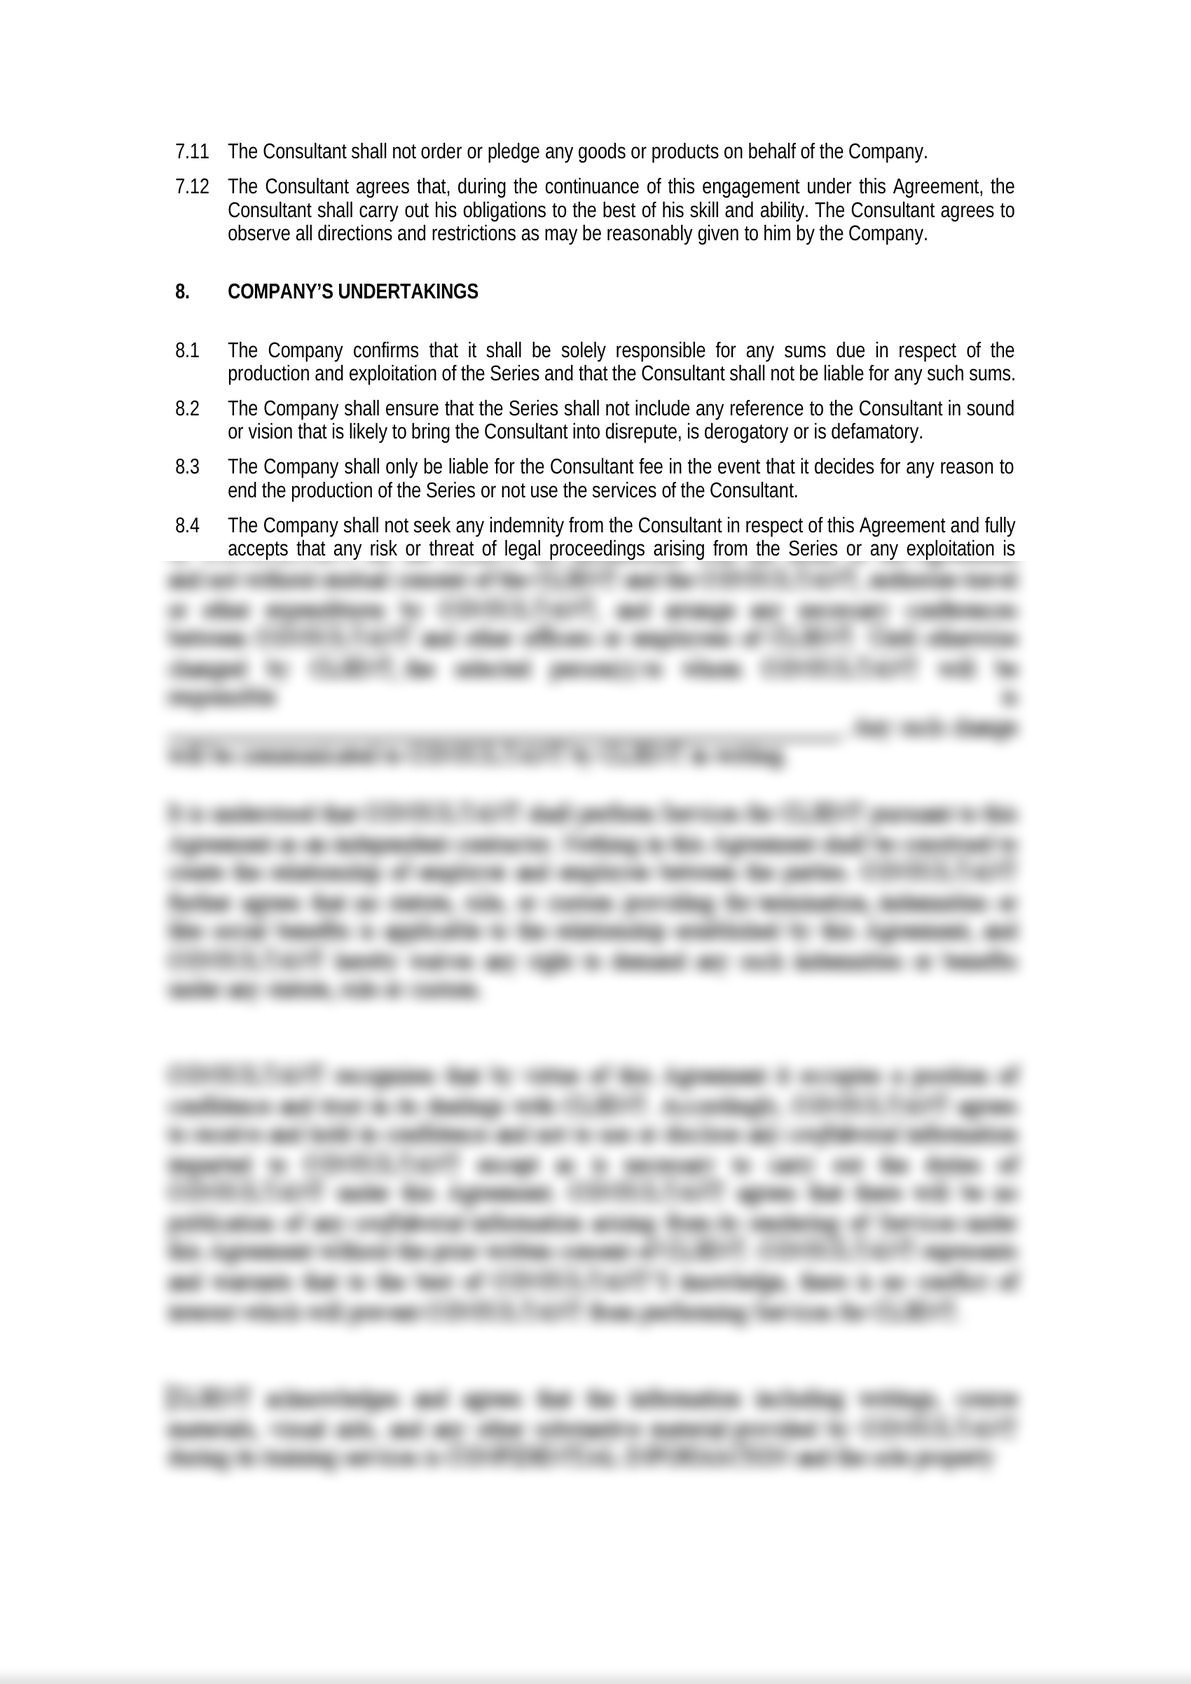 Agreement between a Consultant and a Production Company (Media Law)-2